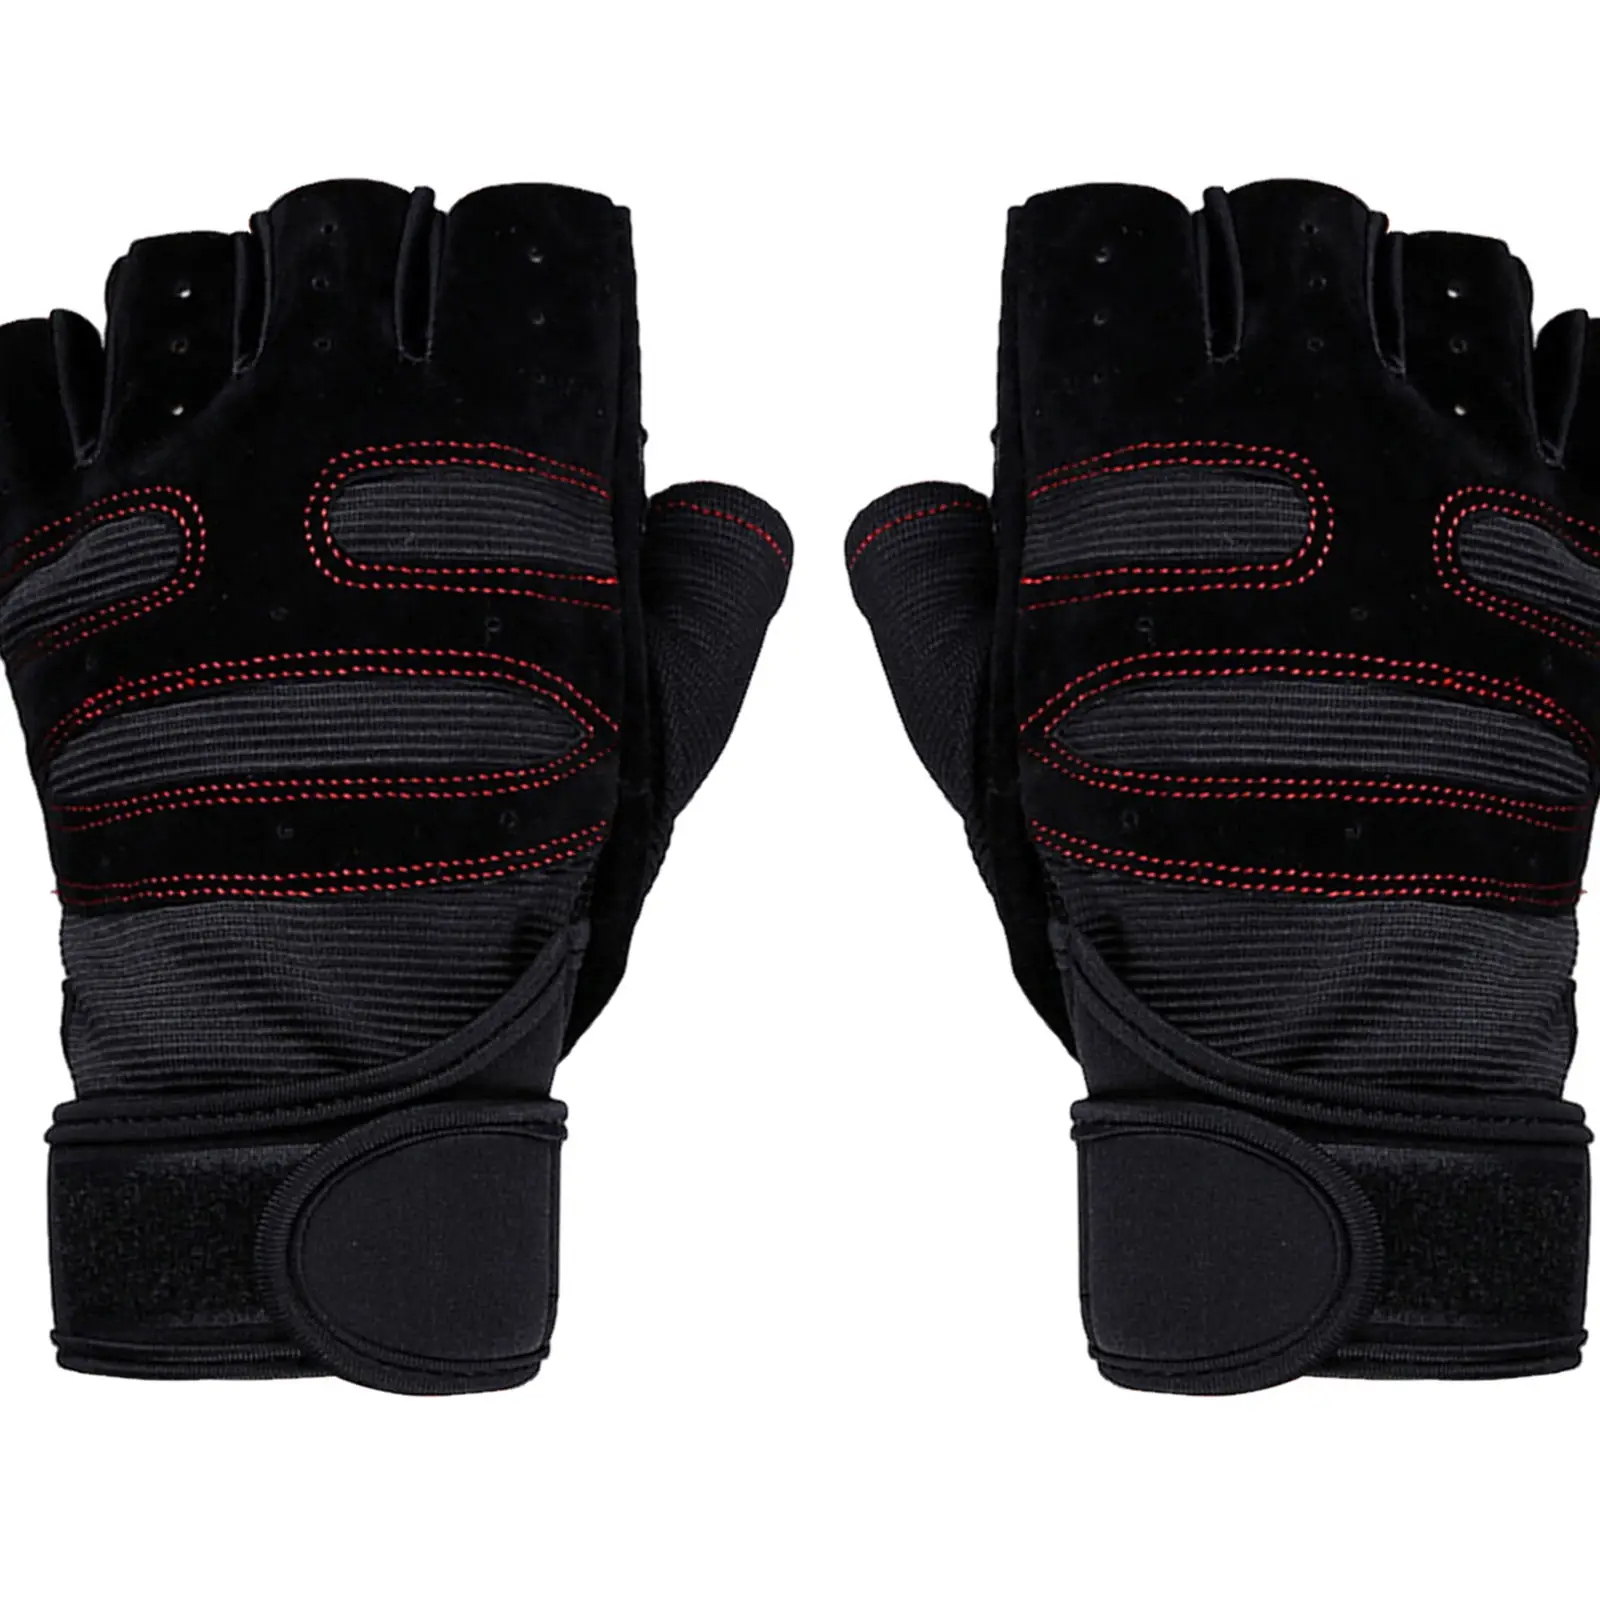 Weight Lifting Gloves Exercise Fitness Cycling Gym Workout Gloves Women Men